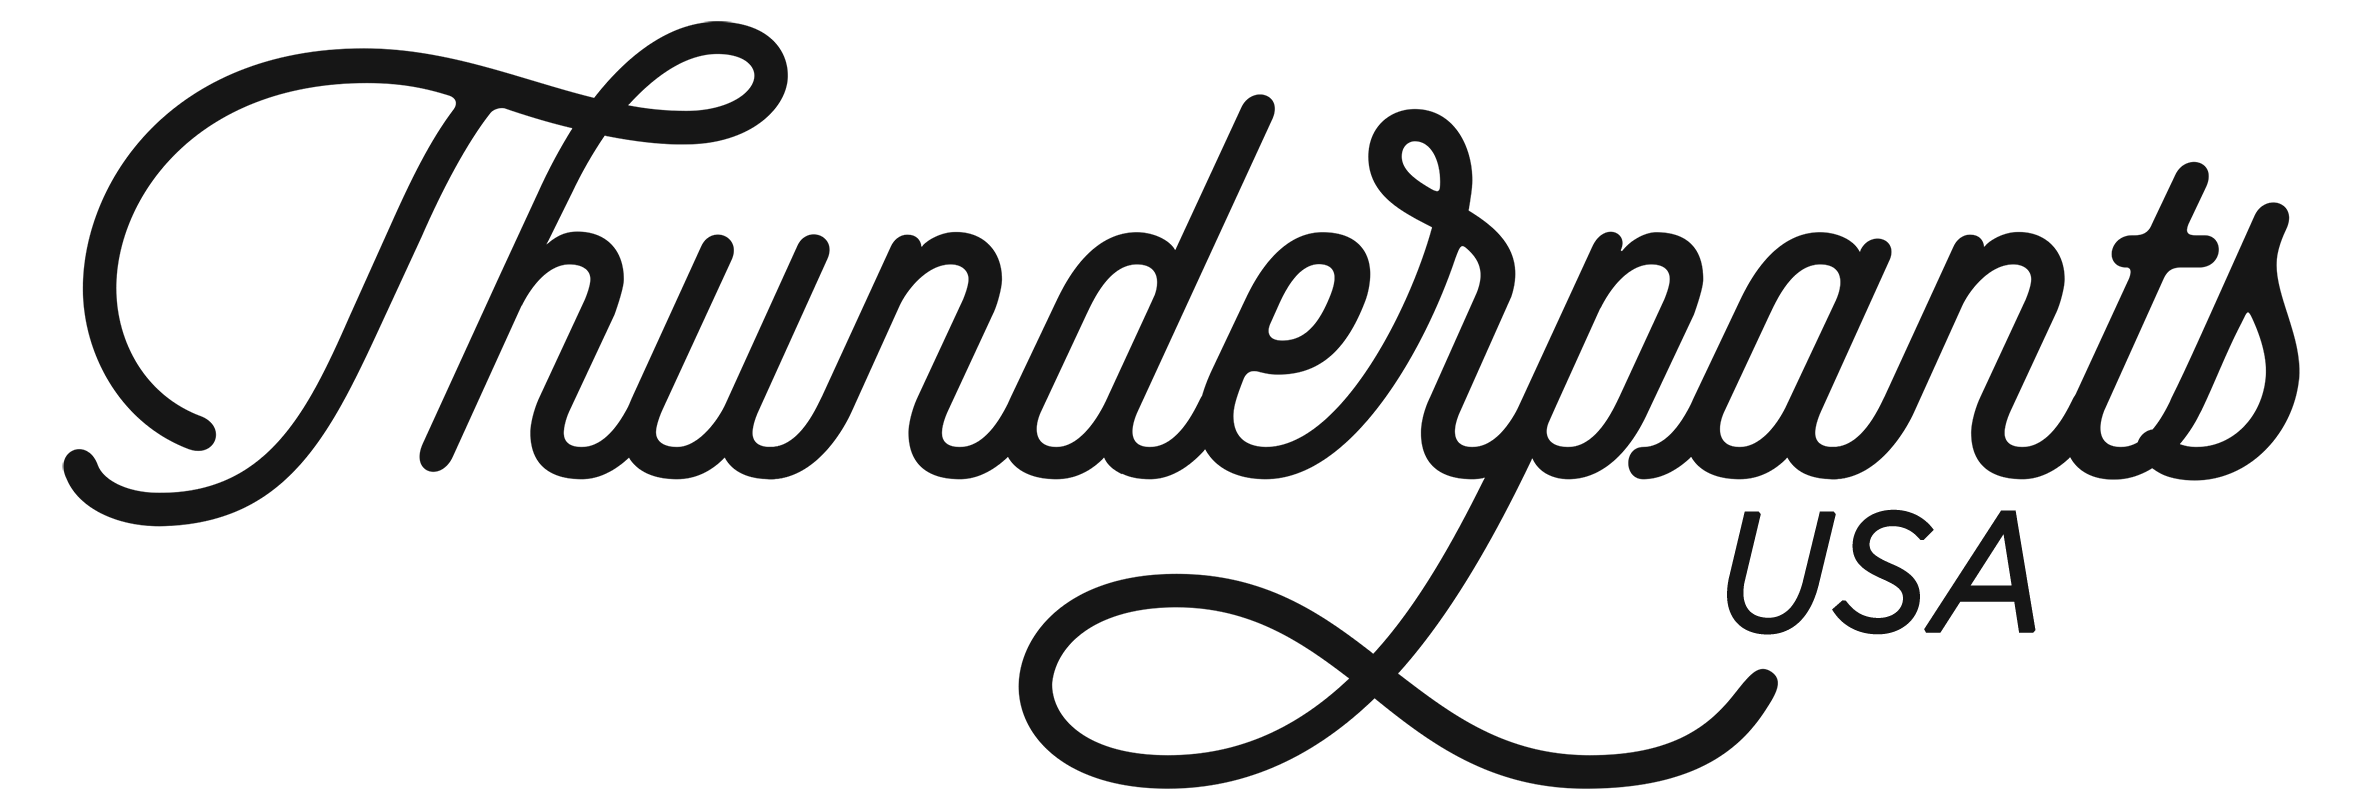 Thunderpants USA - Underwear that doesn't ride up, roll down, and lasts.  Made in USA with Organic Cotton. What more do we need??